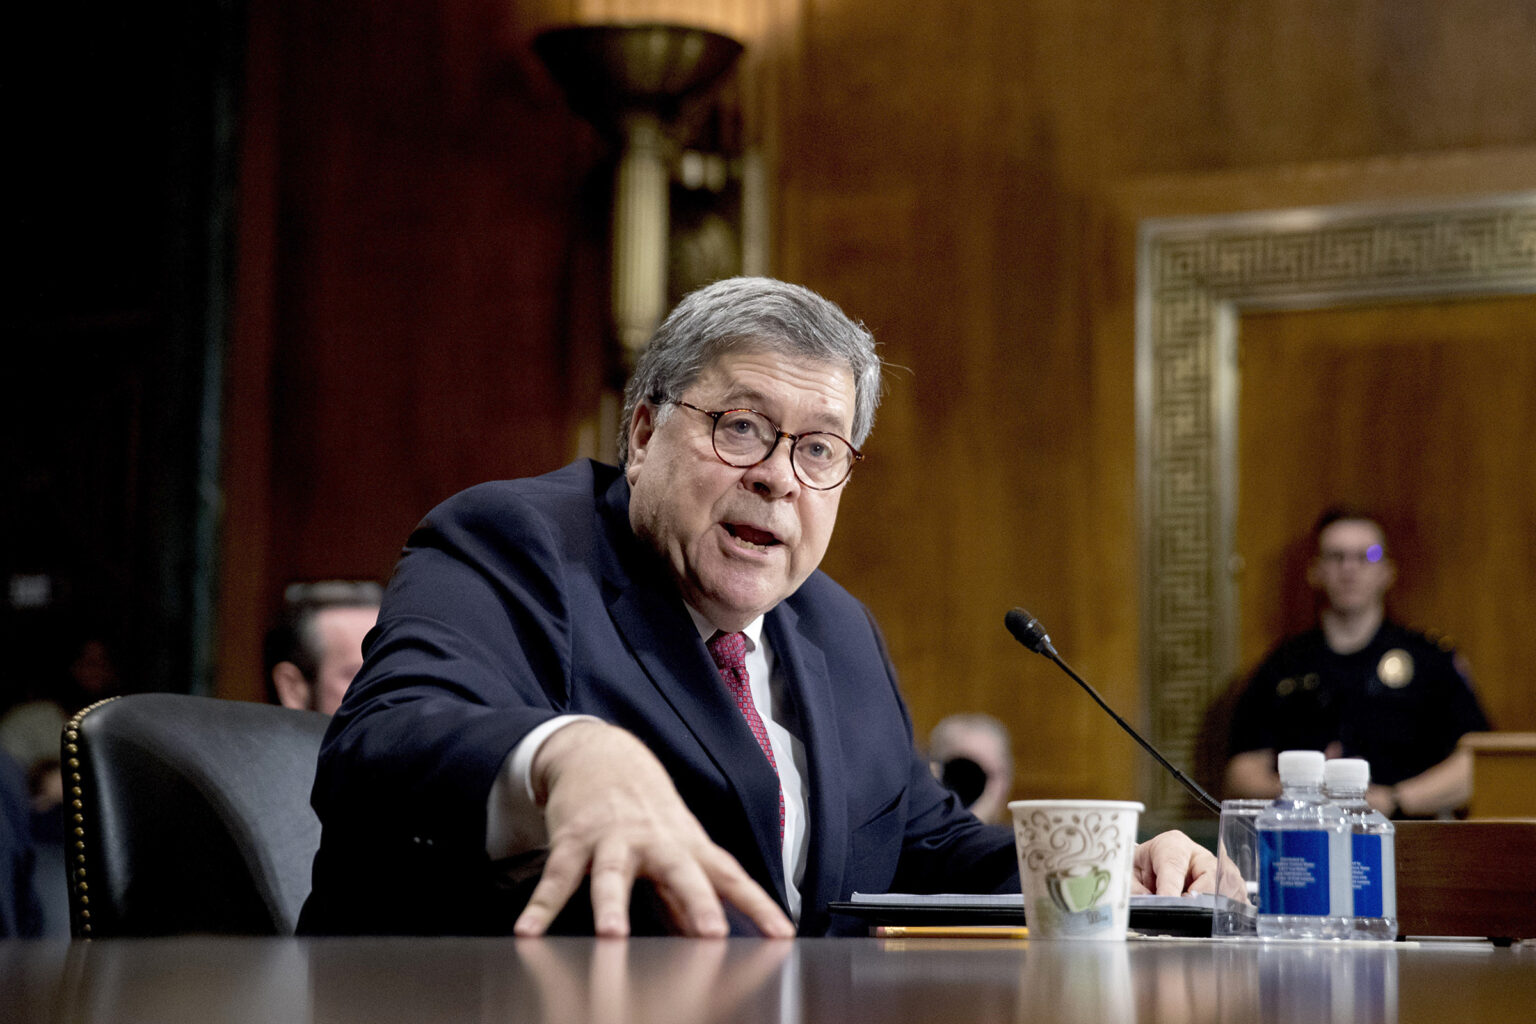 William Barr has been one of Trump's closest confidants, but it looks like his time as attorney general is up. See the new report.